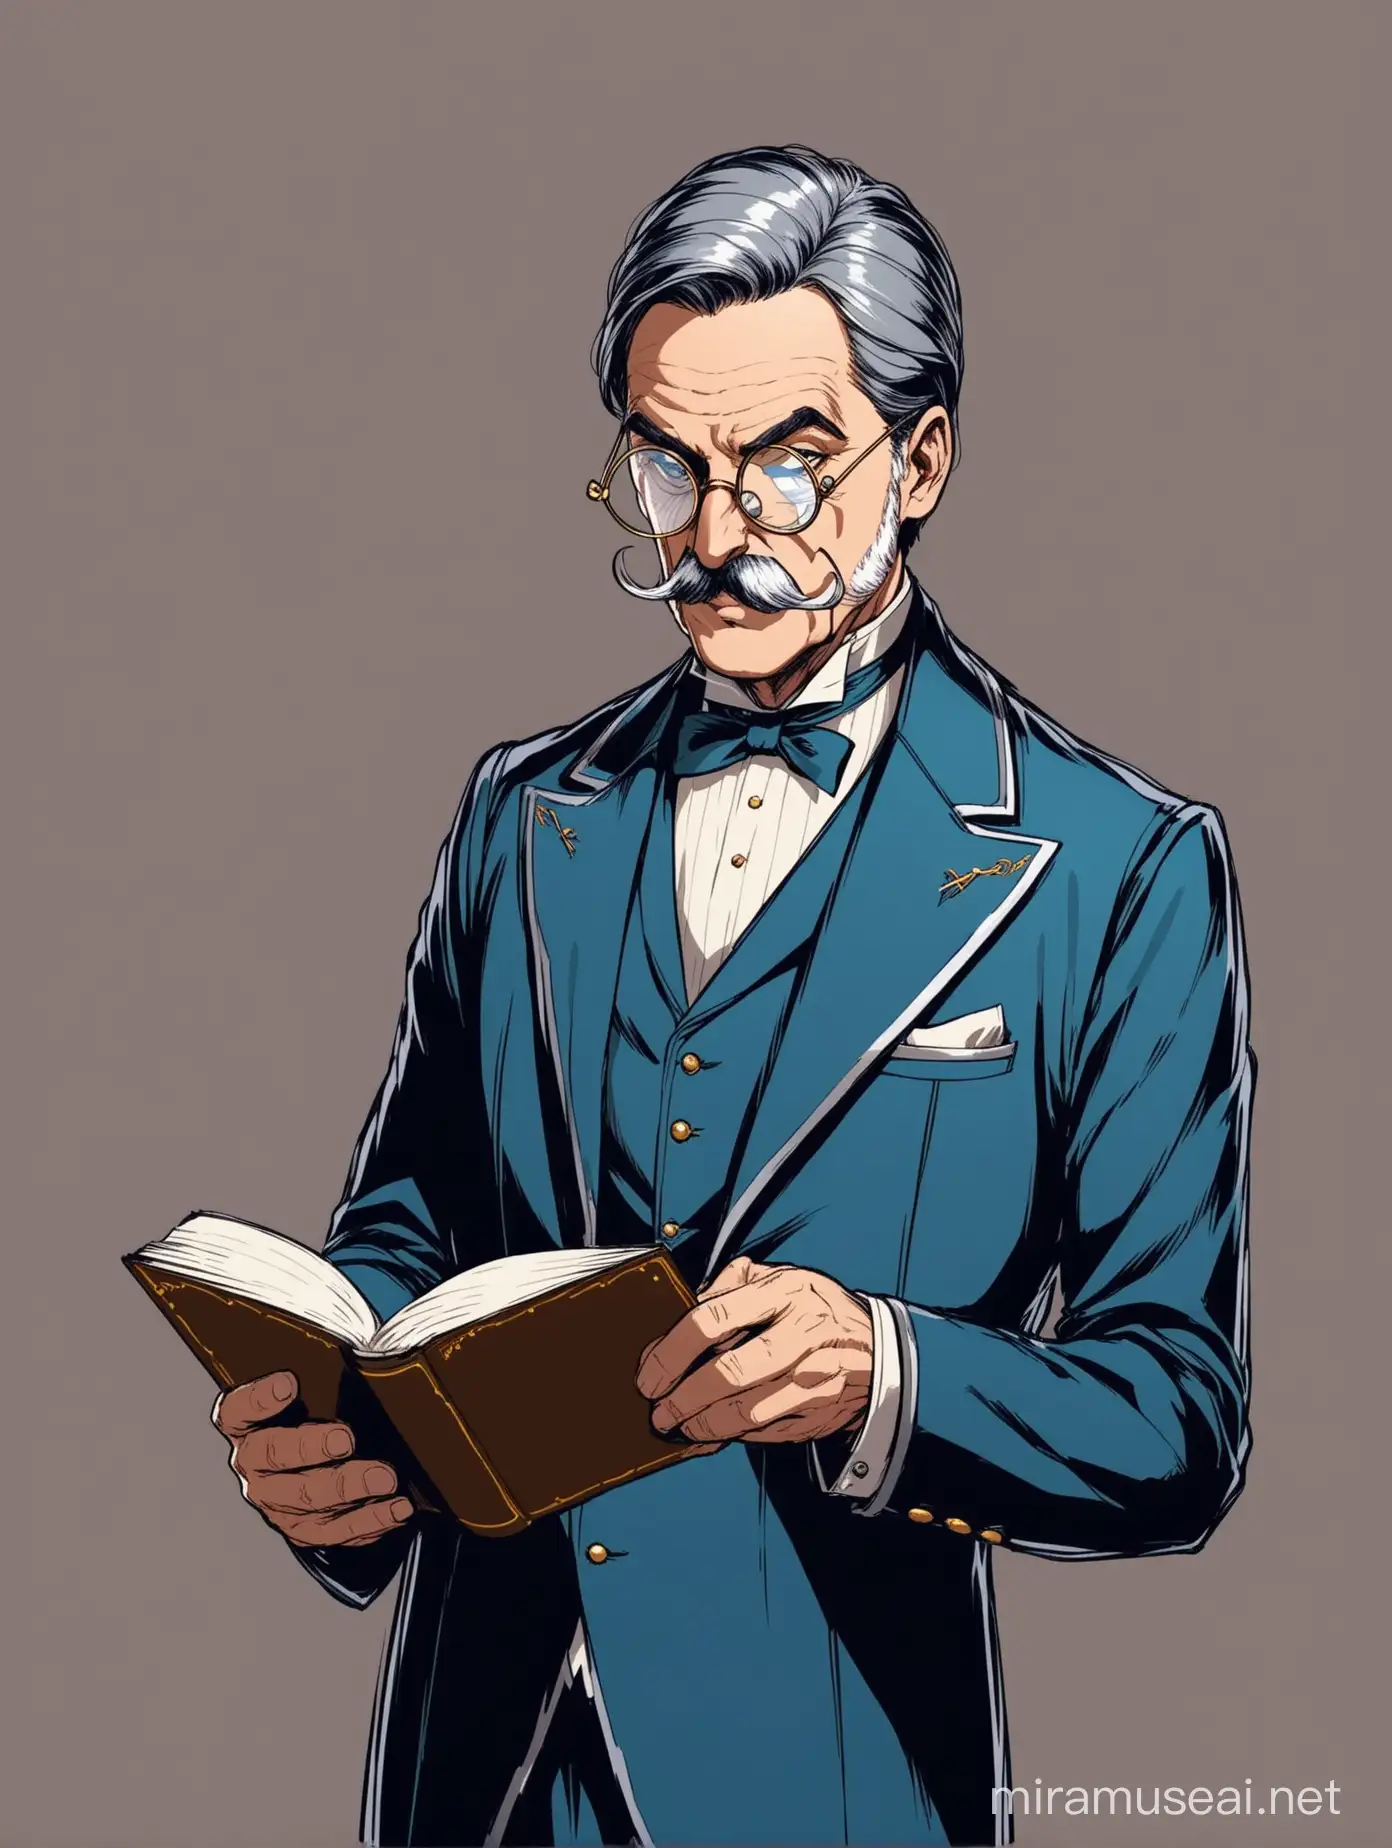 Sophisticated Mature Gentleman in Blue and Silver Noble Suit Reading a Book